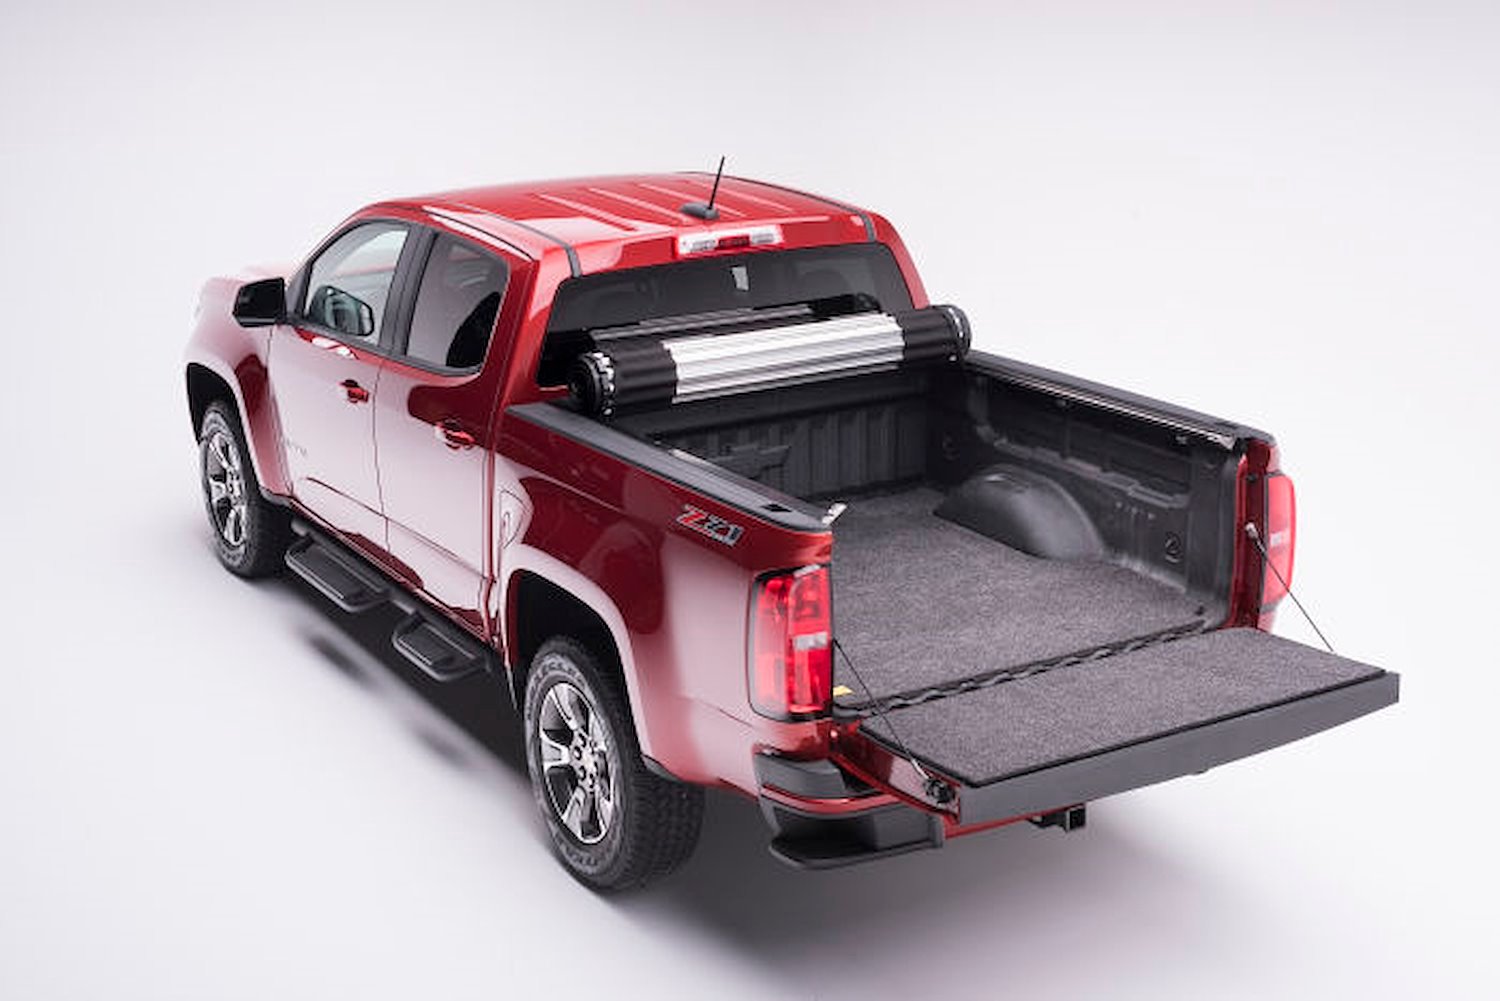 Classic Truck Bed Mat Fits Select Chevy Colorado, GMC Canyon [61.700 in. Bed]